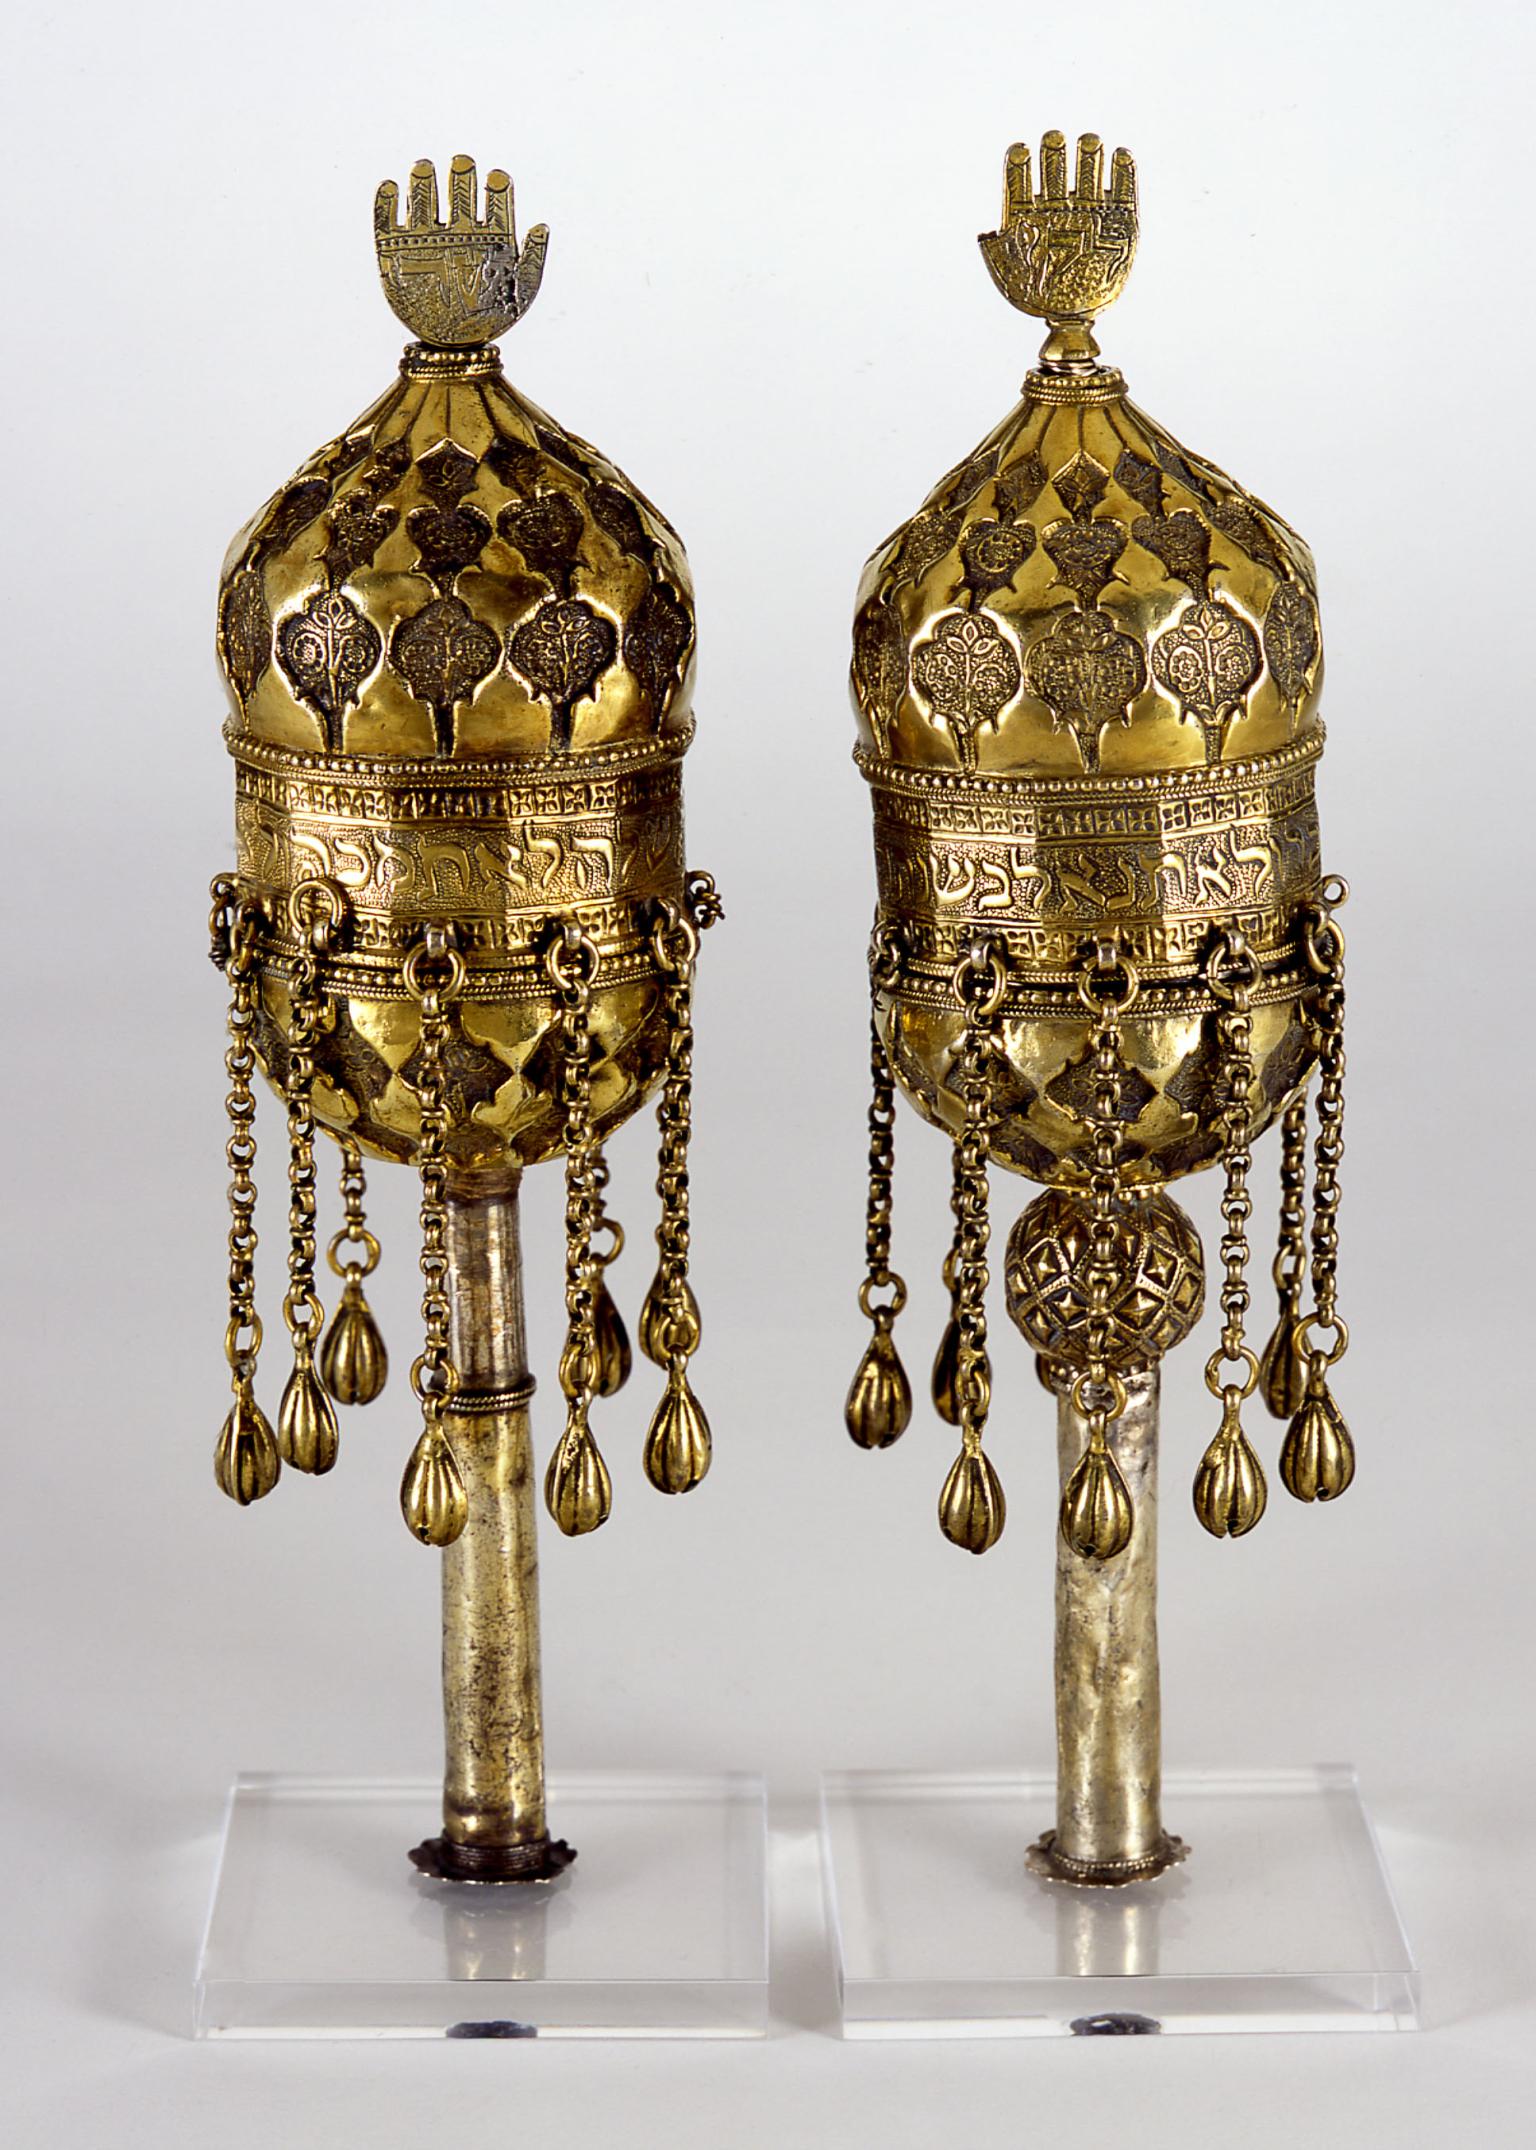 Two finials engraved with designs and Hebrew inscription, with chains hanging down from bottom and hand-shaped sculpture on top. 